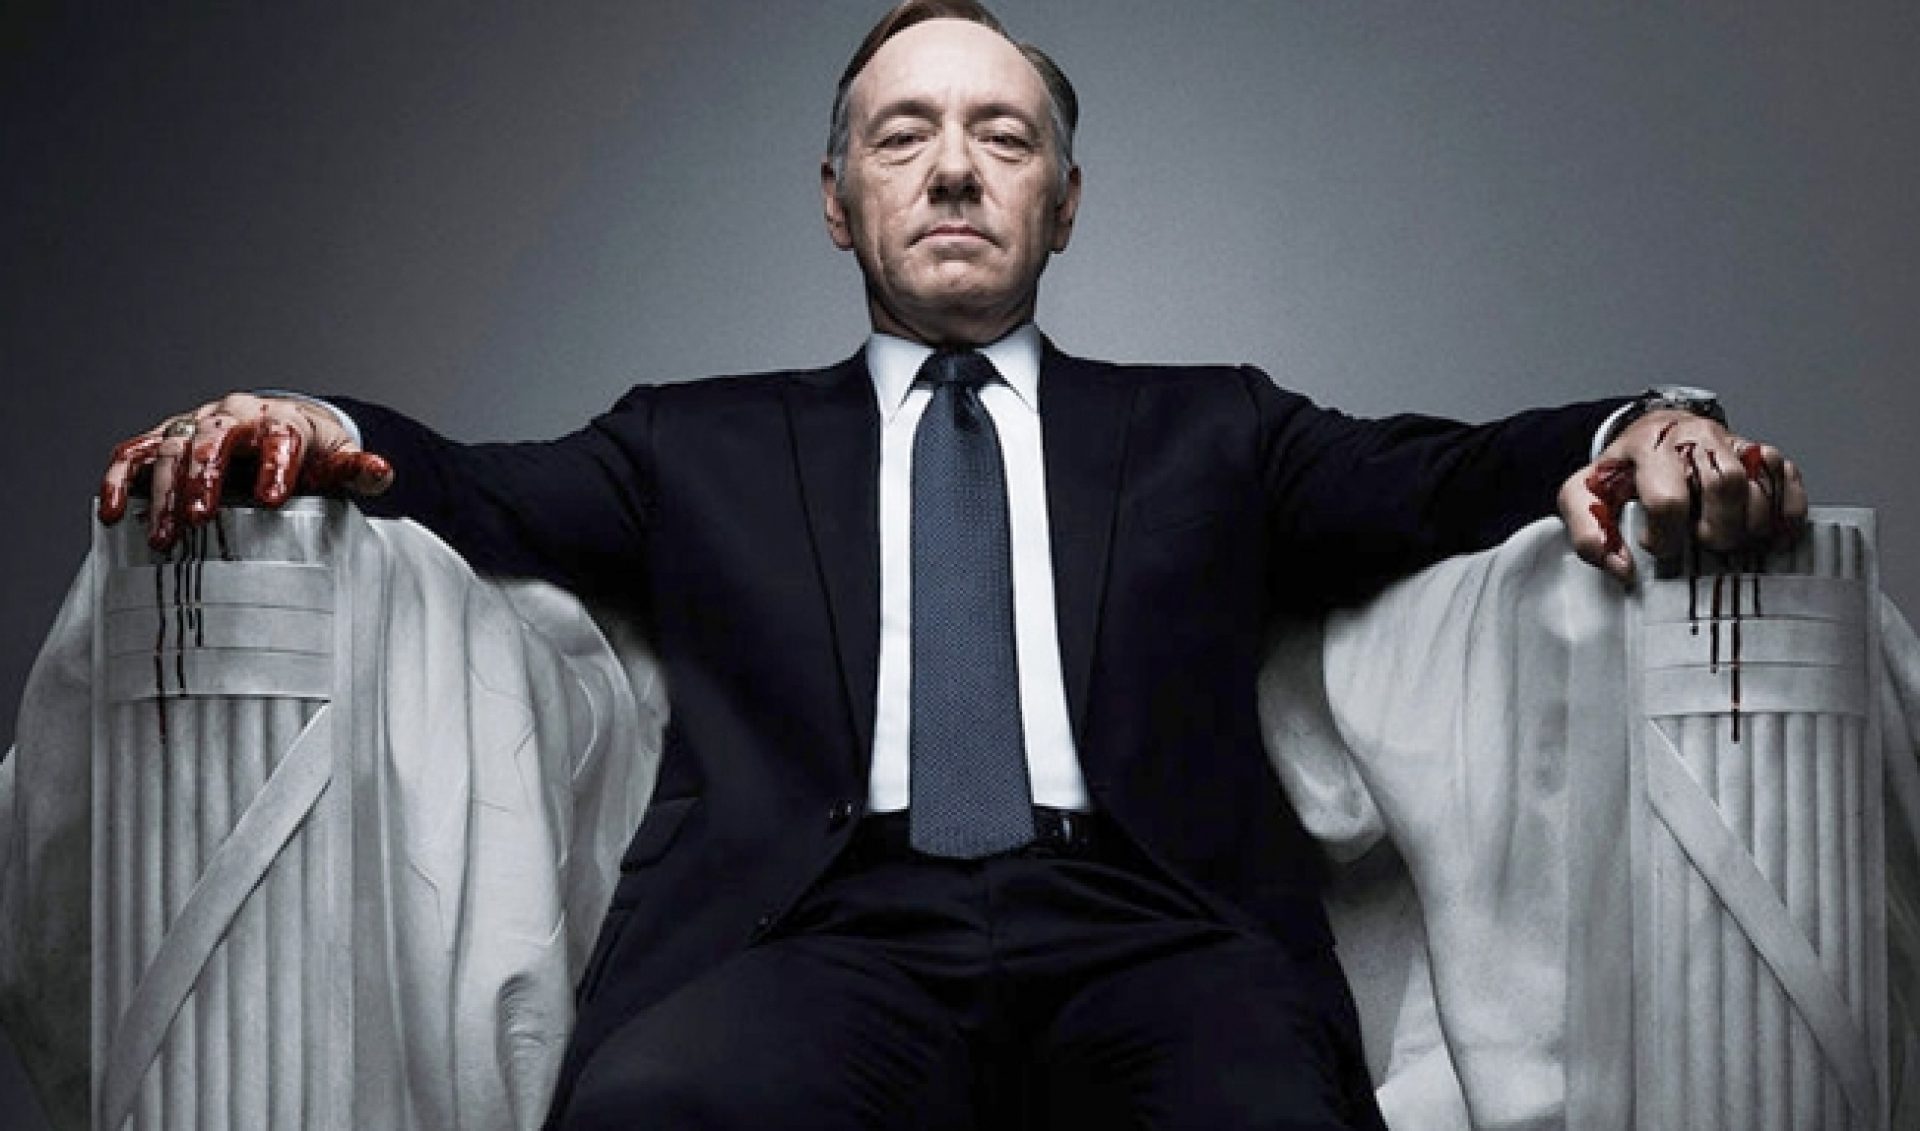 What Critics Are Saying About Spacey And Netflix’s ‘House Of Cards’